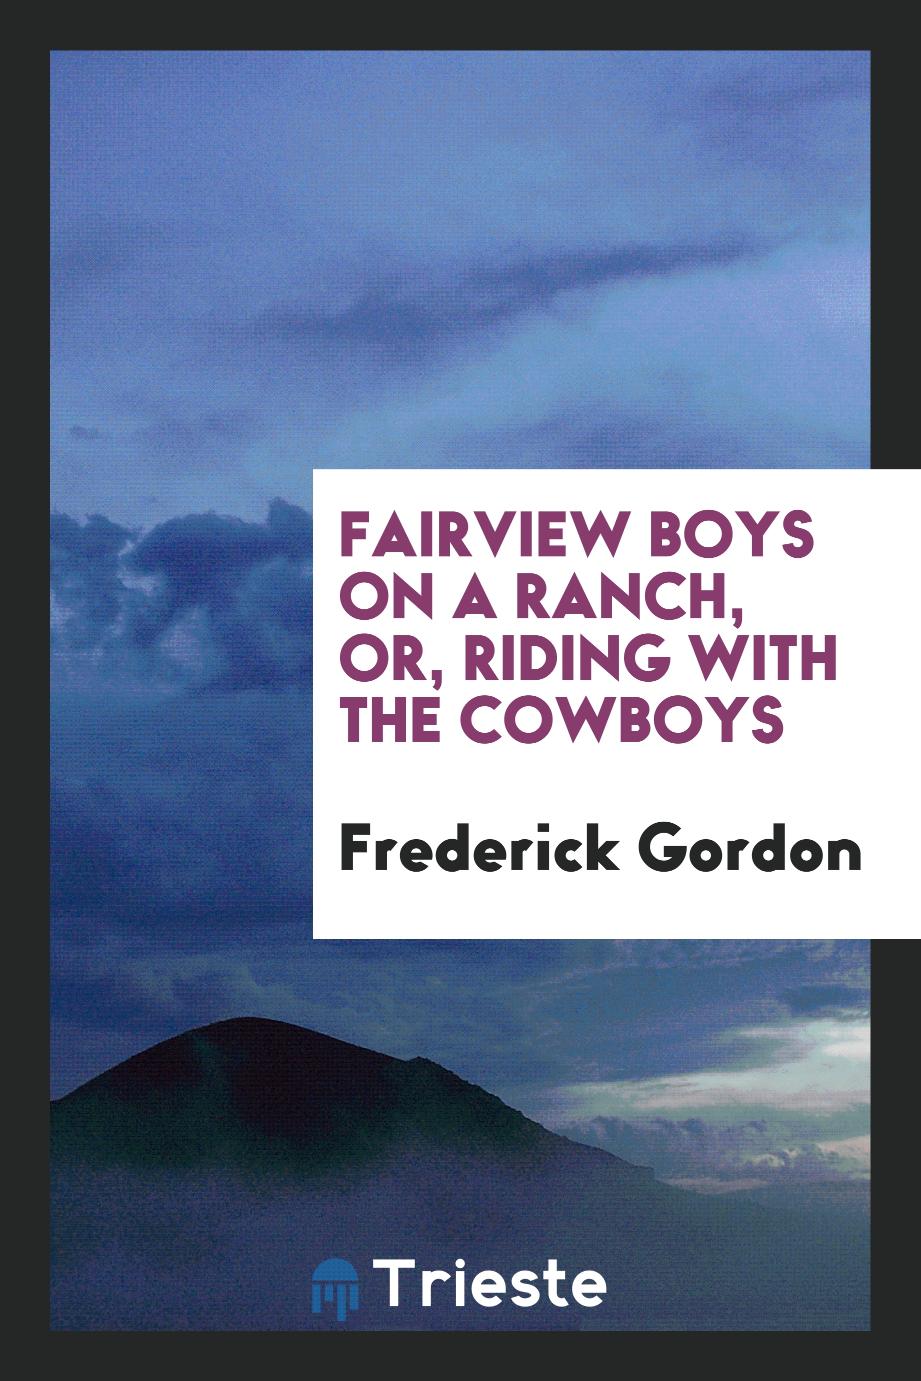 Fairview Boys on a Ranch, or, Riding with the Cowboys